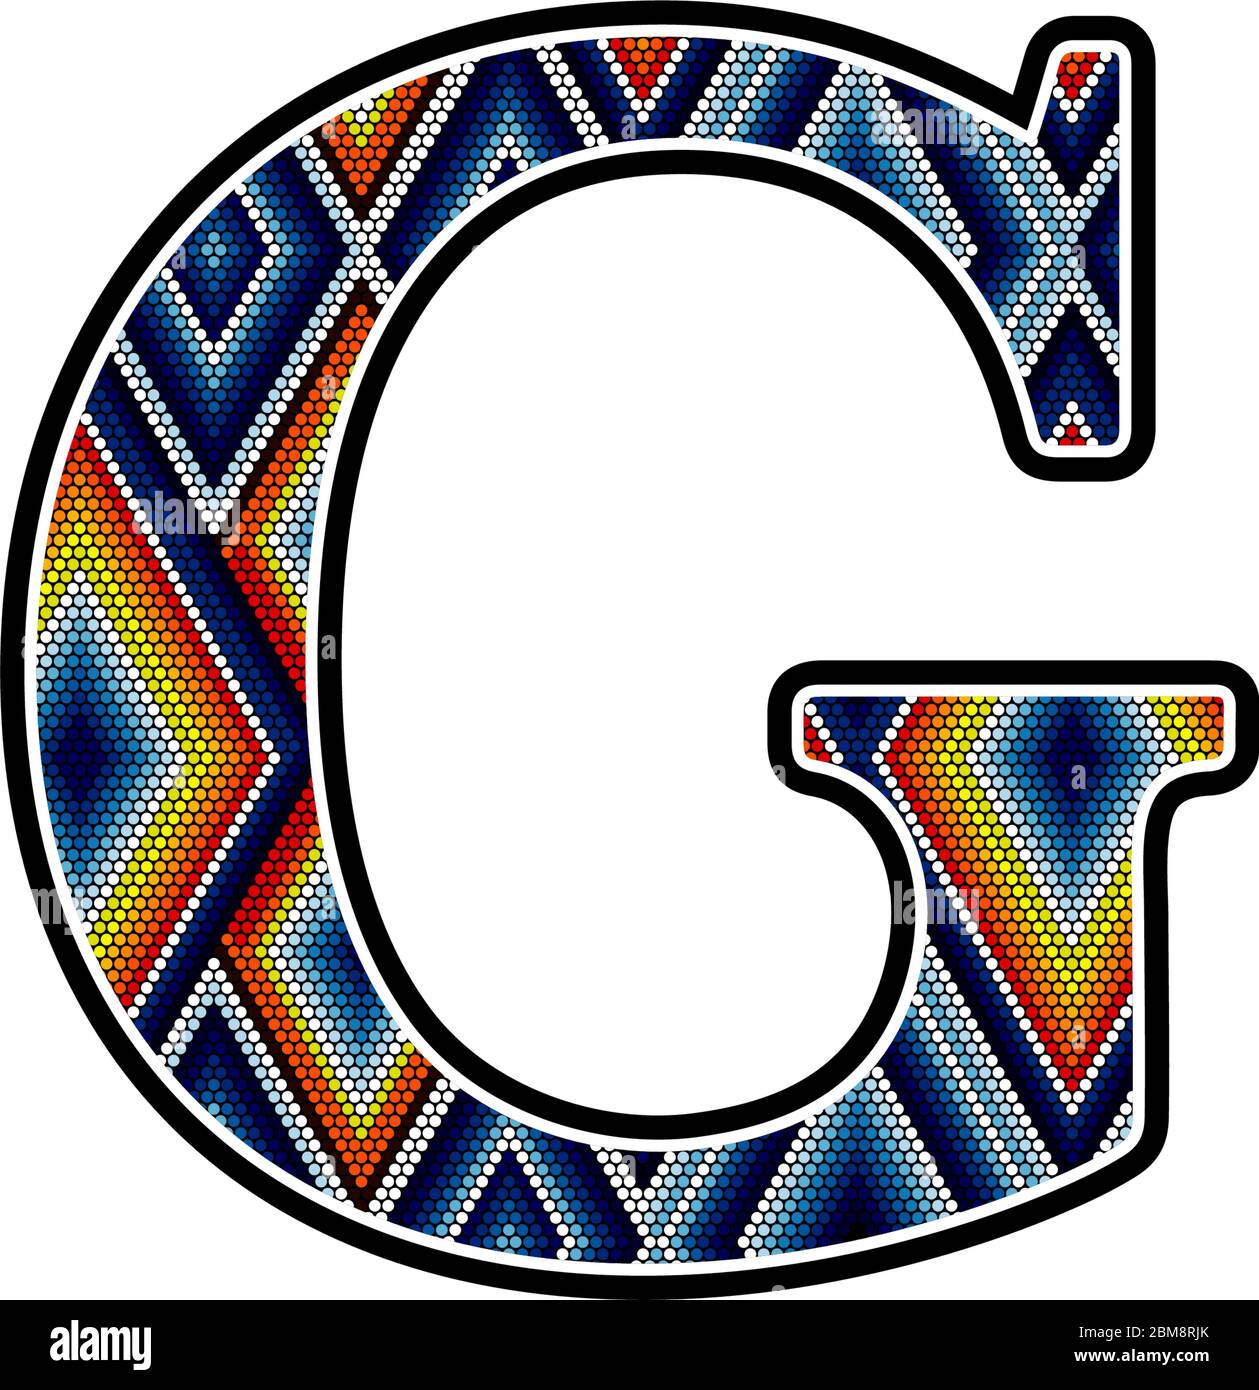 initial capital letter G with colorful dots abstract design inspired in mexican huichol art style. Isolated on white background Stock Vector